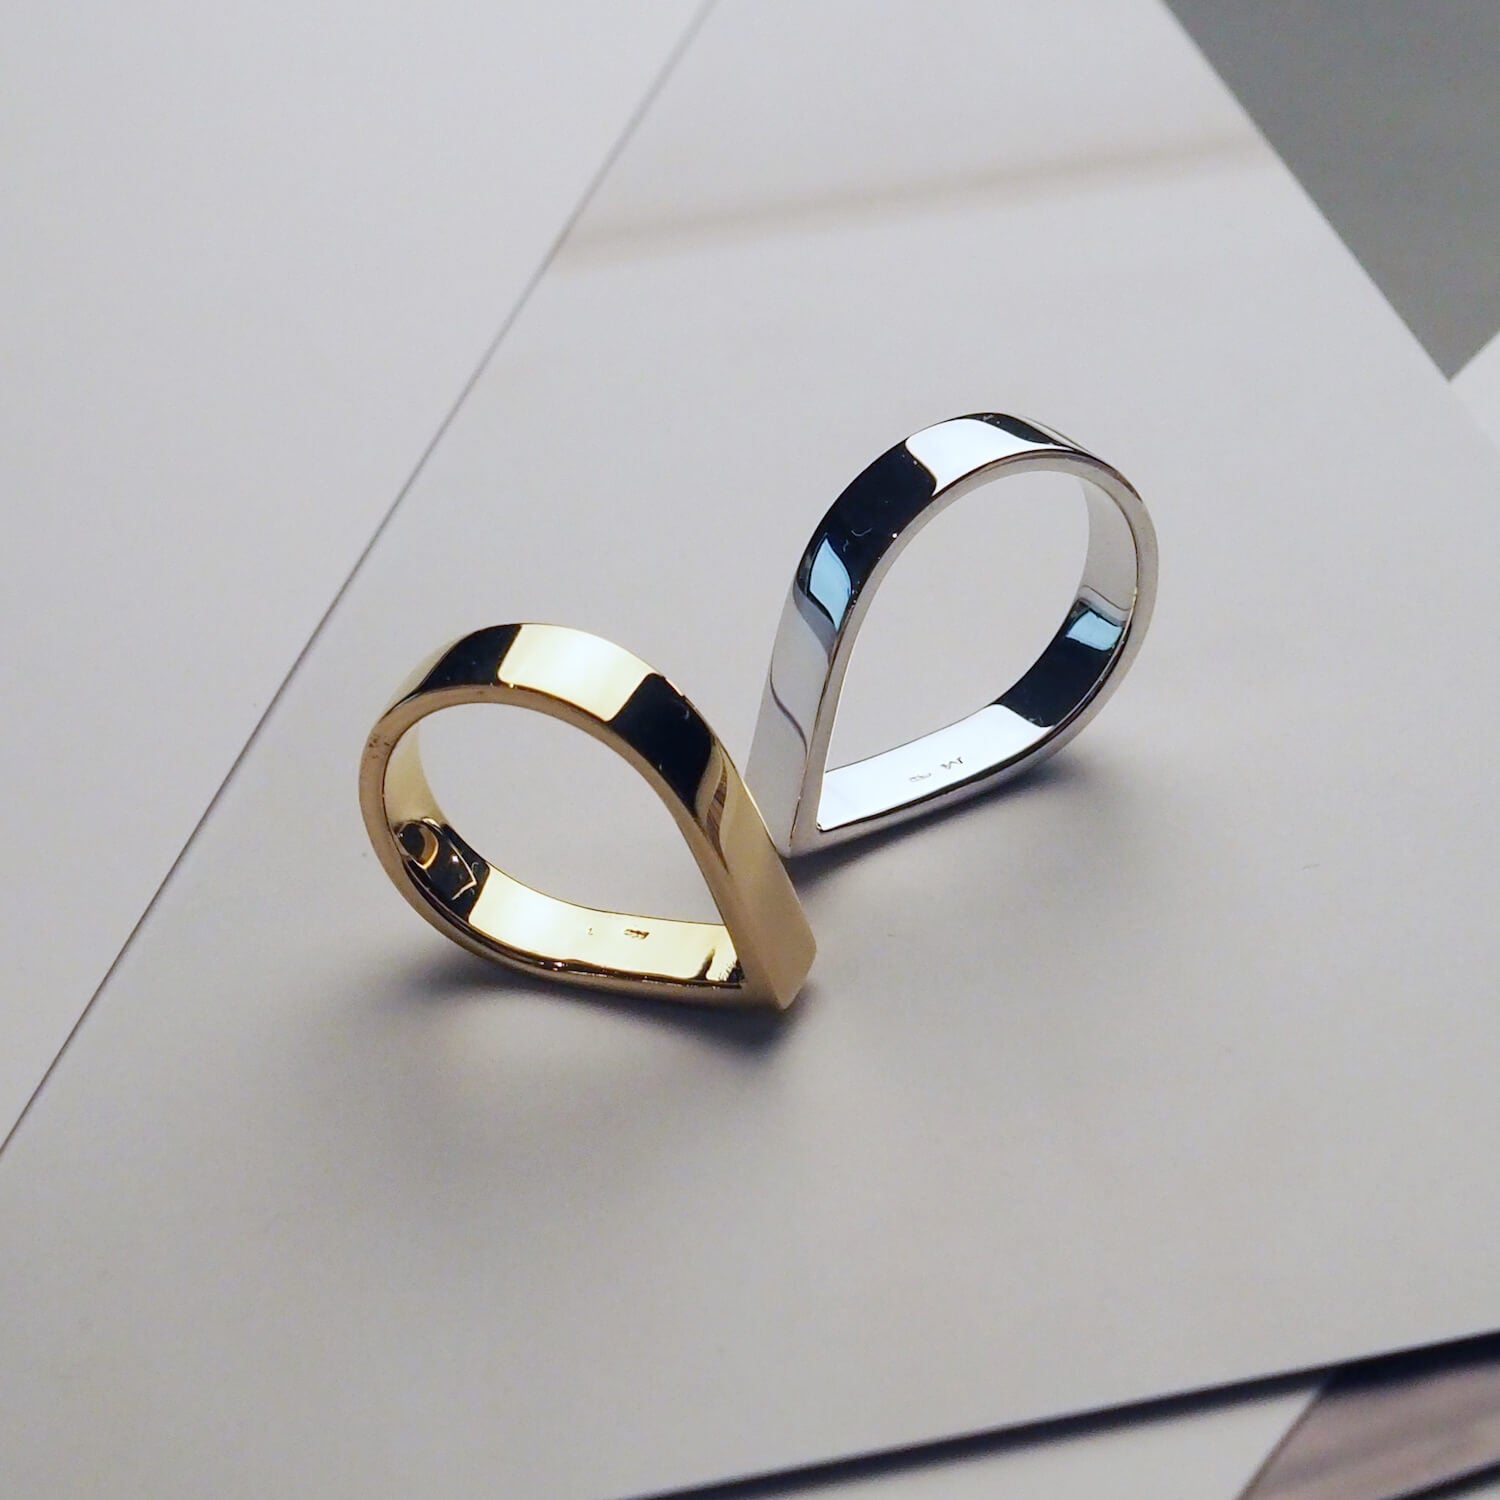 Two Wide Point Rings, one in silver and one in gold